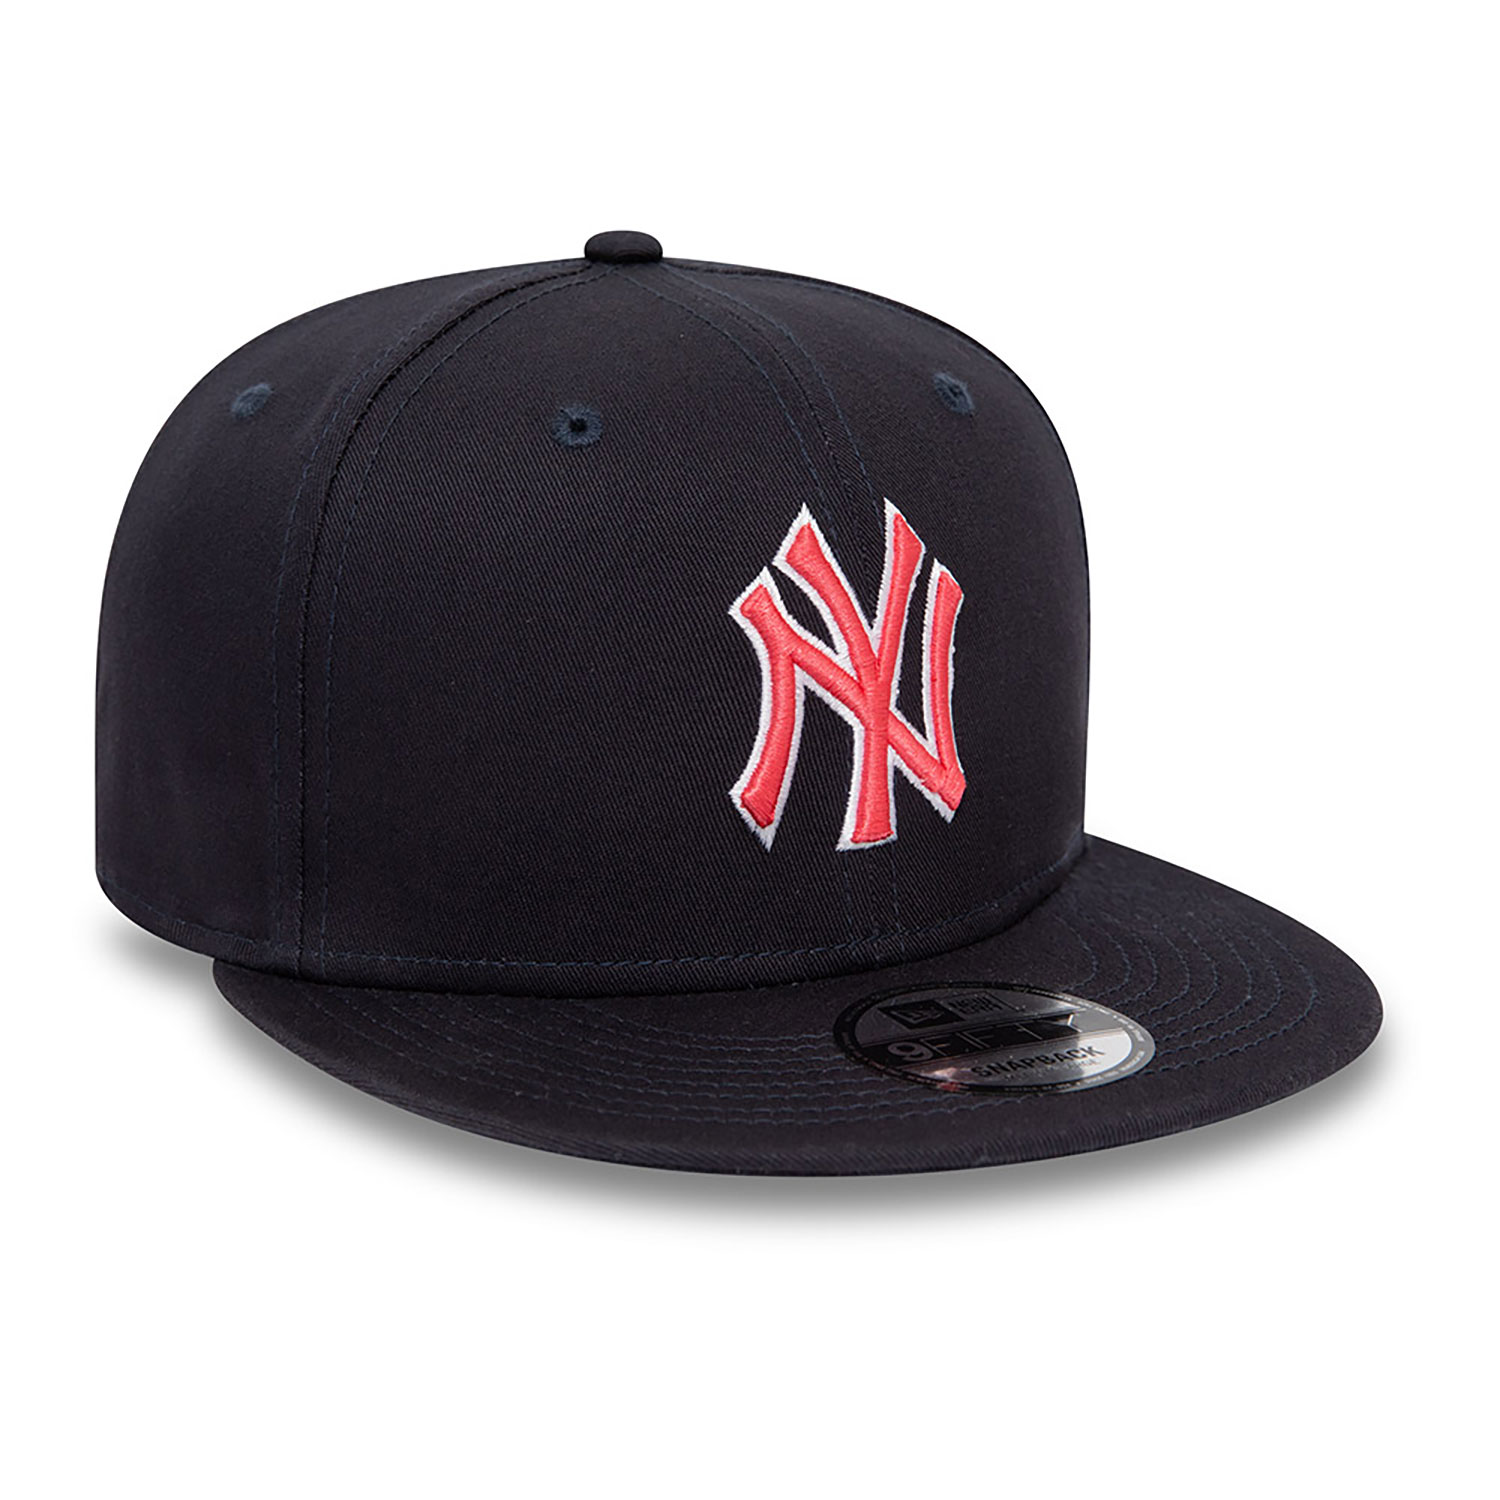 New York Yankees MLB Outline Navy 9FIFTY Adjustable Cap